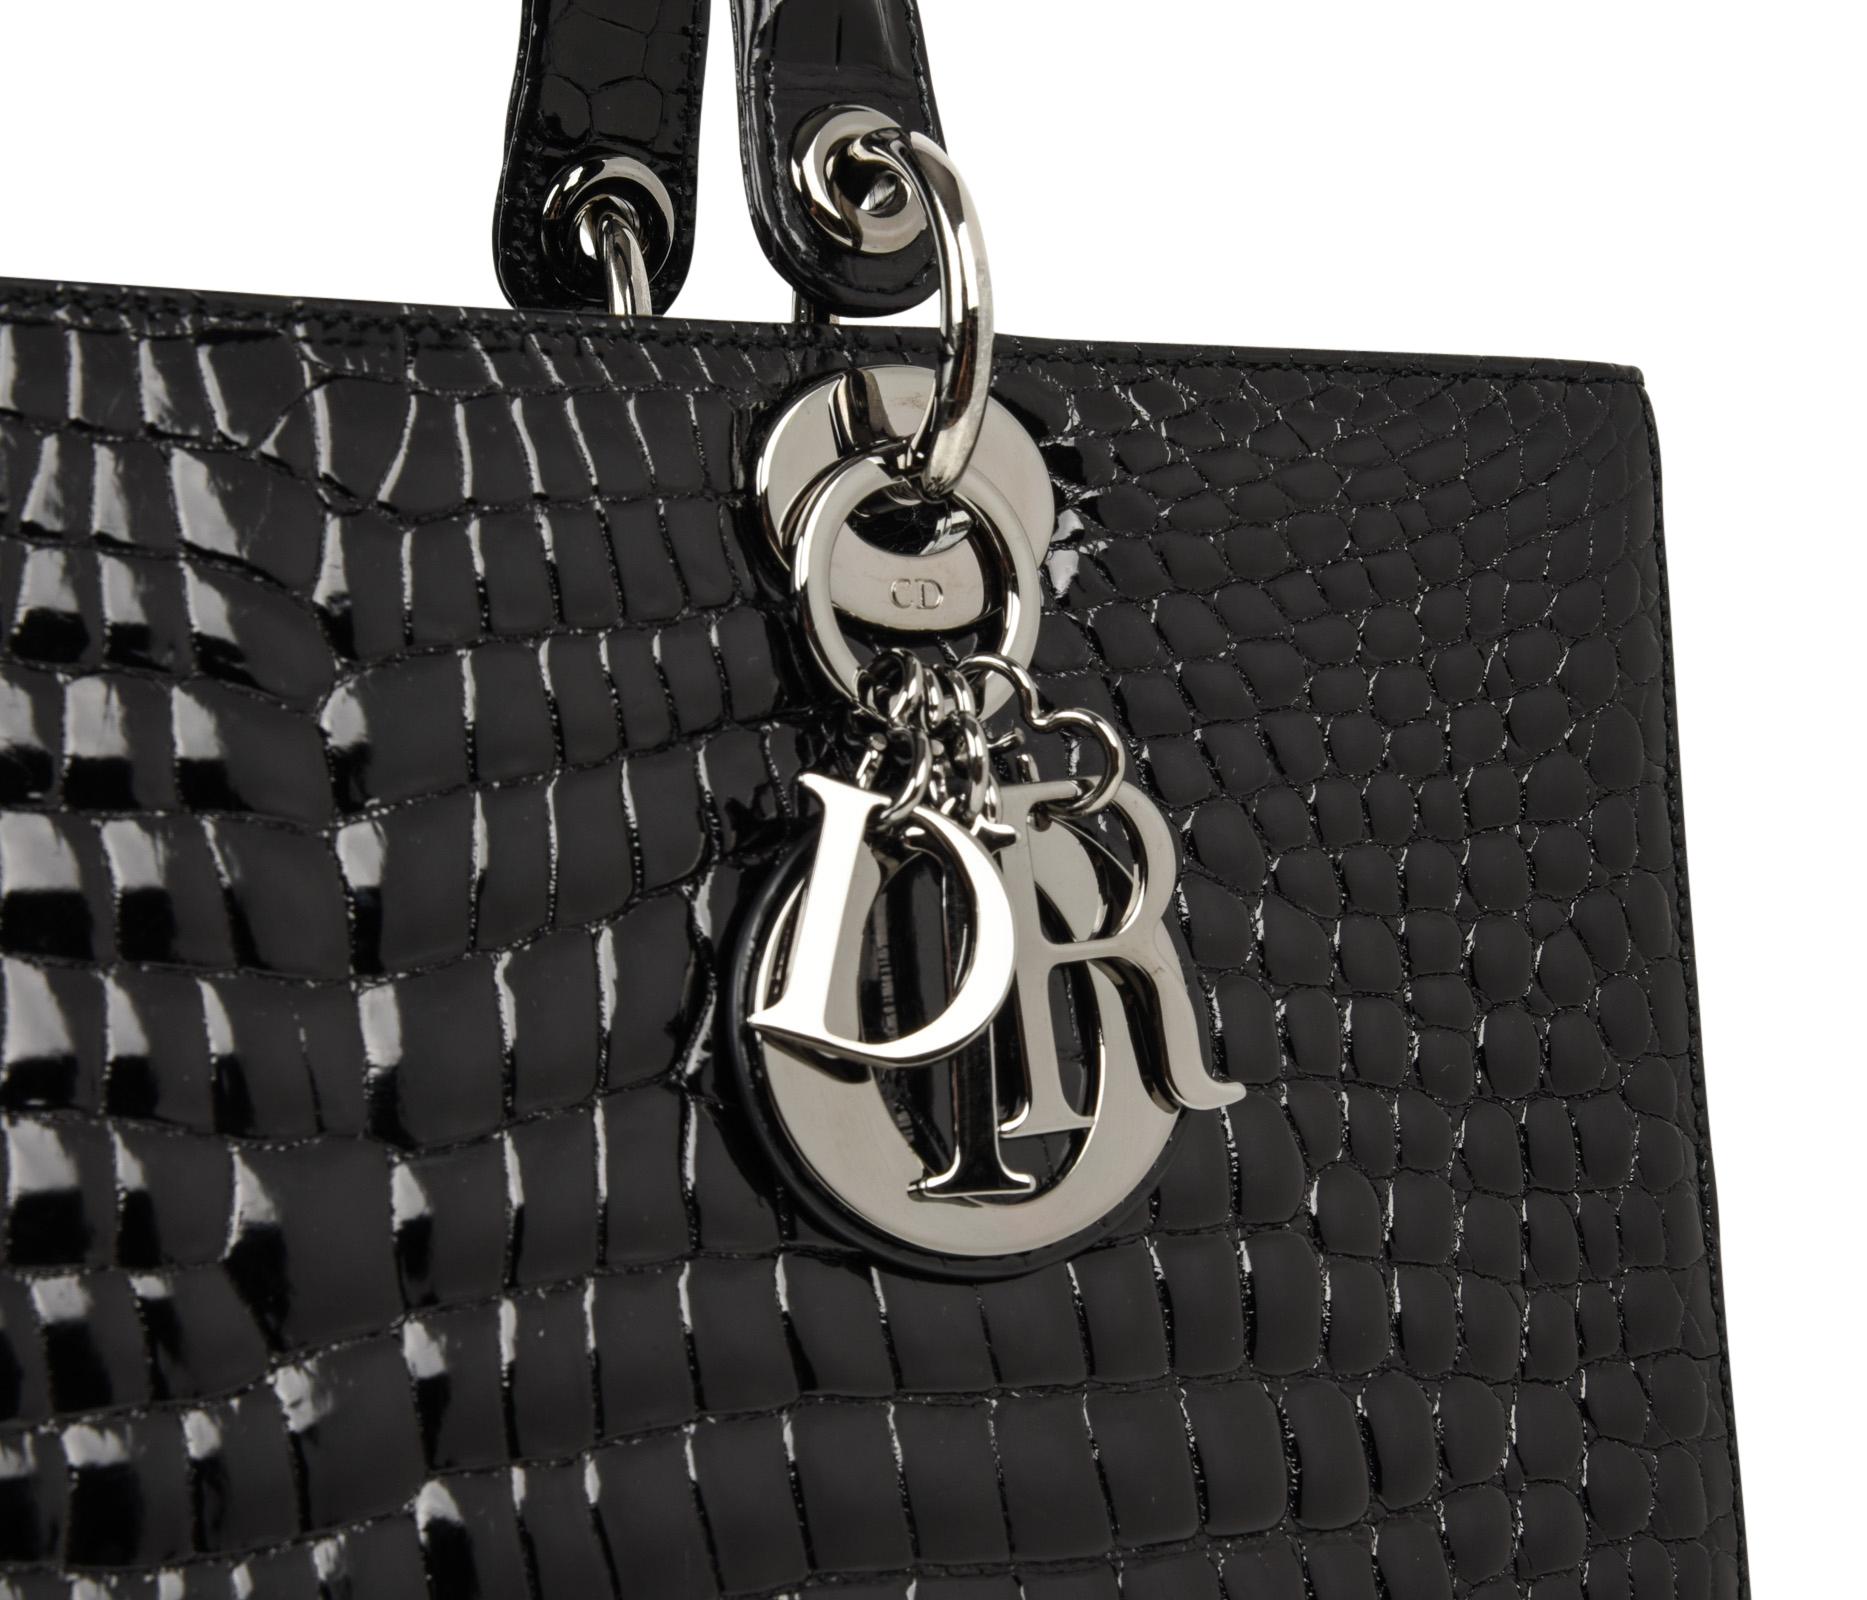 Christian Dior Lady Dior large Black crocodile limited edition bag with ruthenium toned hardware.
Crafted by hand this is the flagship model.
Signature logo charms.
Top zipper closure with signature toggle.  
Zipper pocket on interior rear wall. 